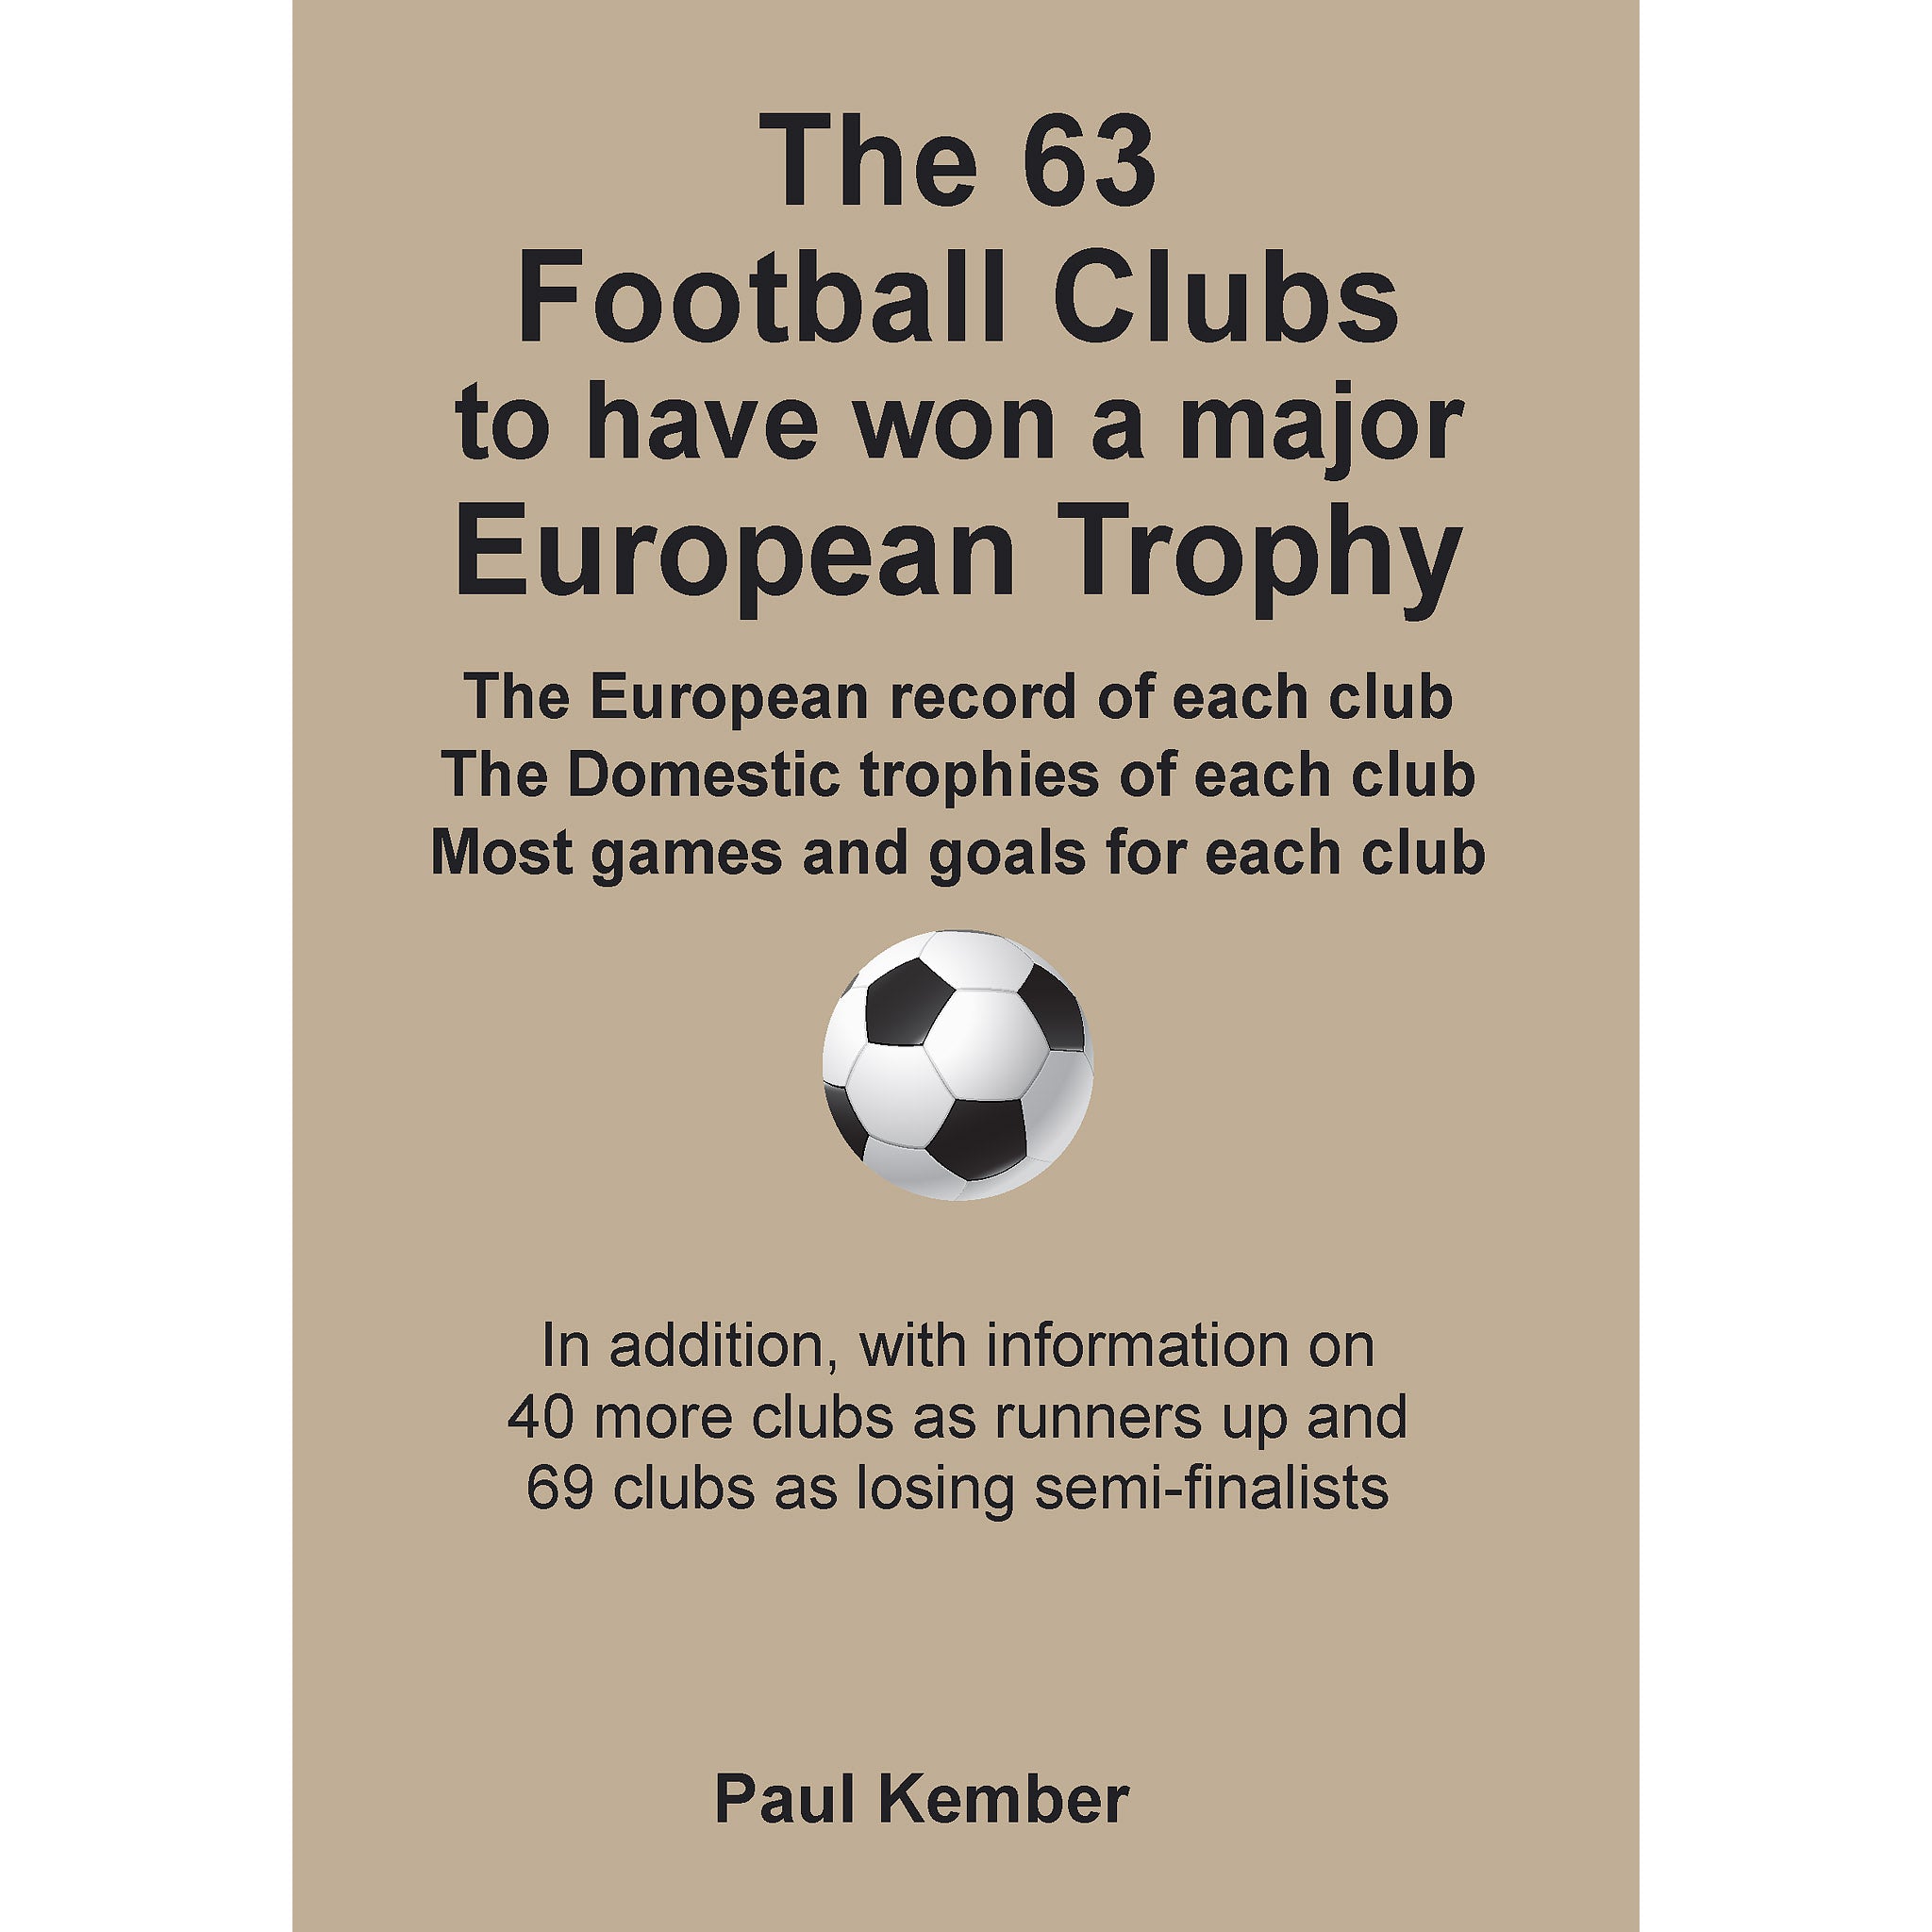 The 63 Football Clubs to have won a major European Trophy